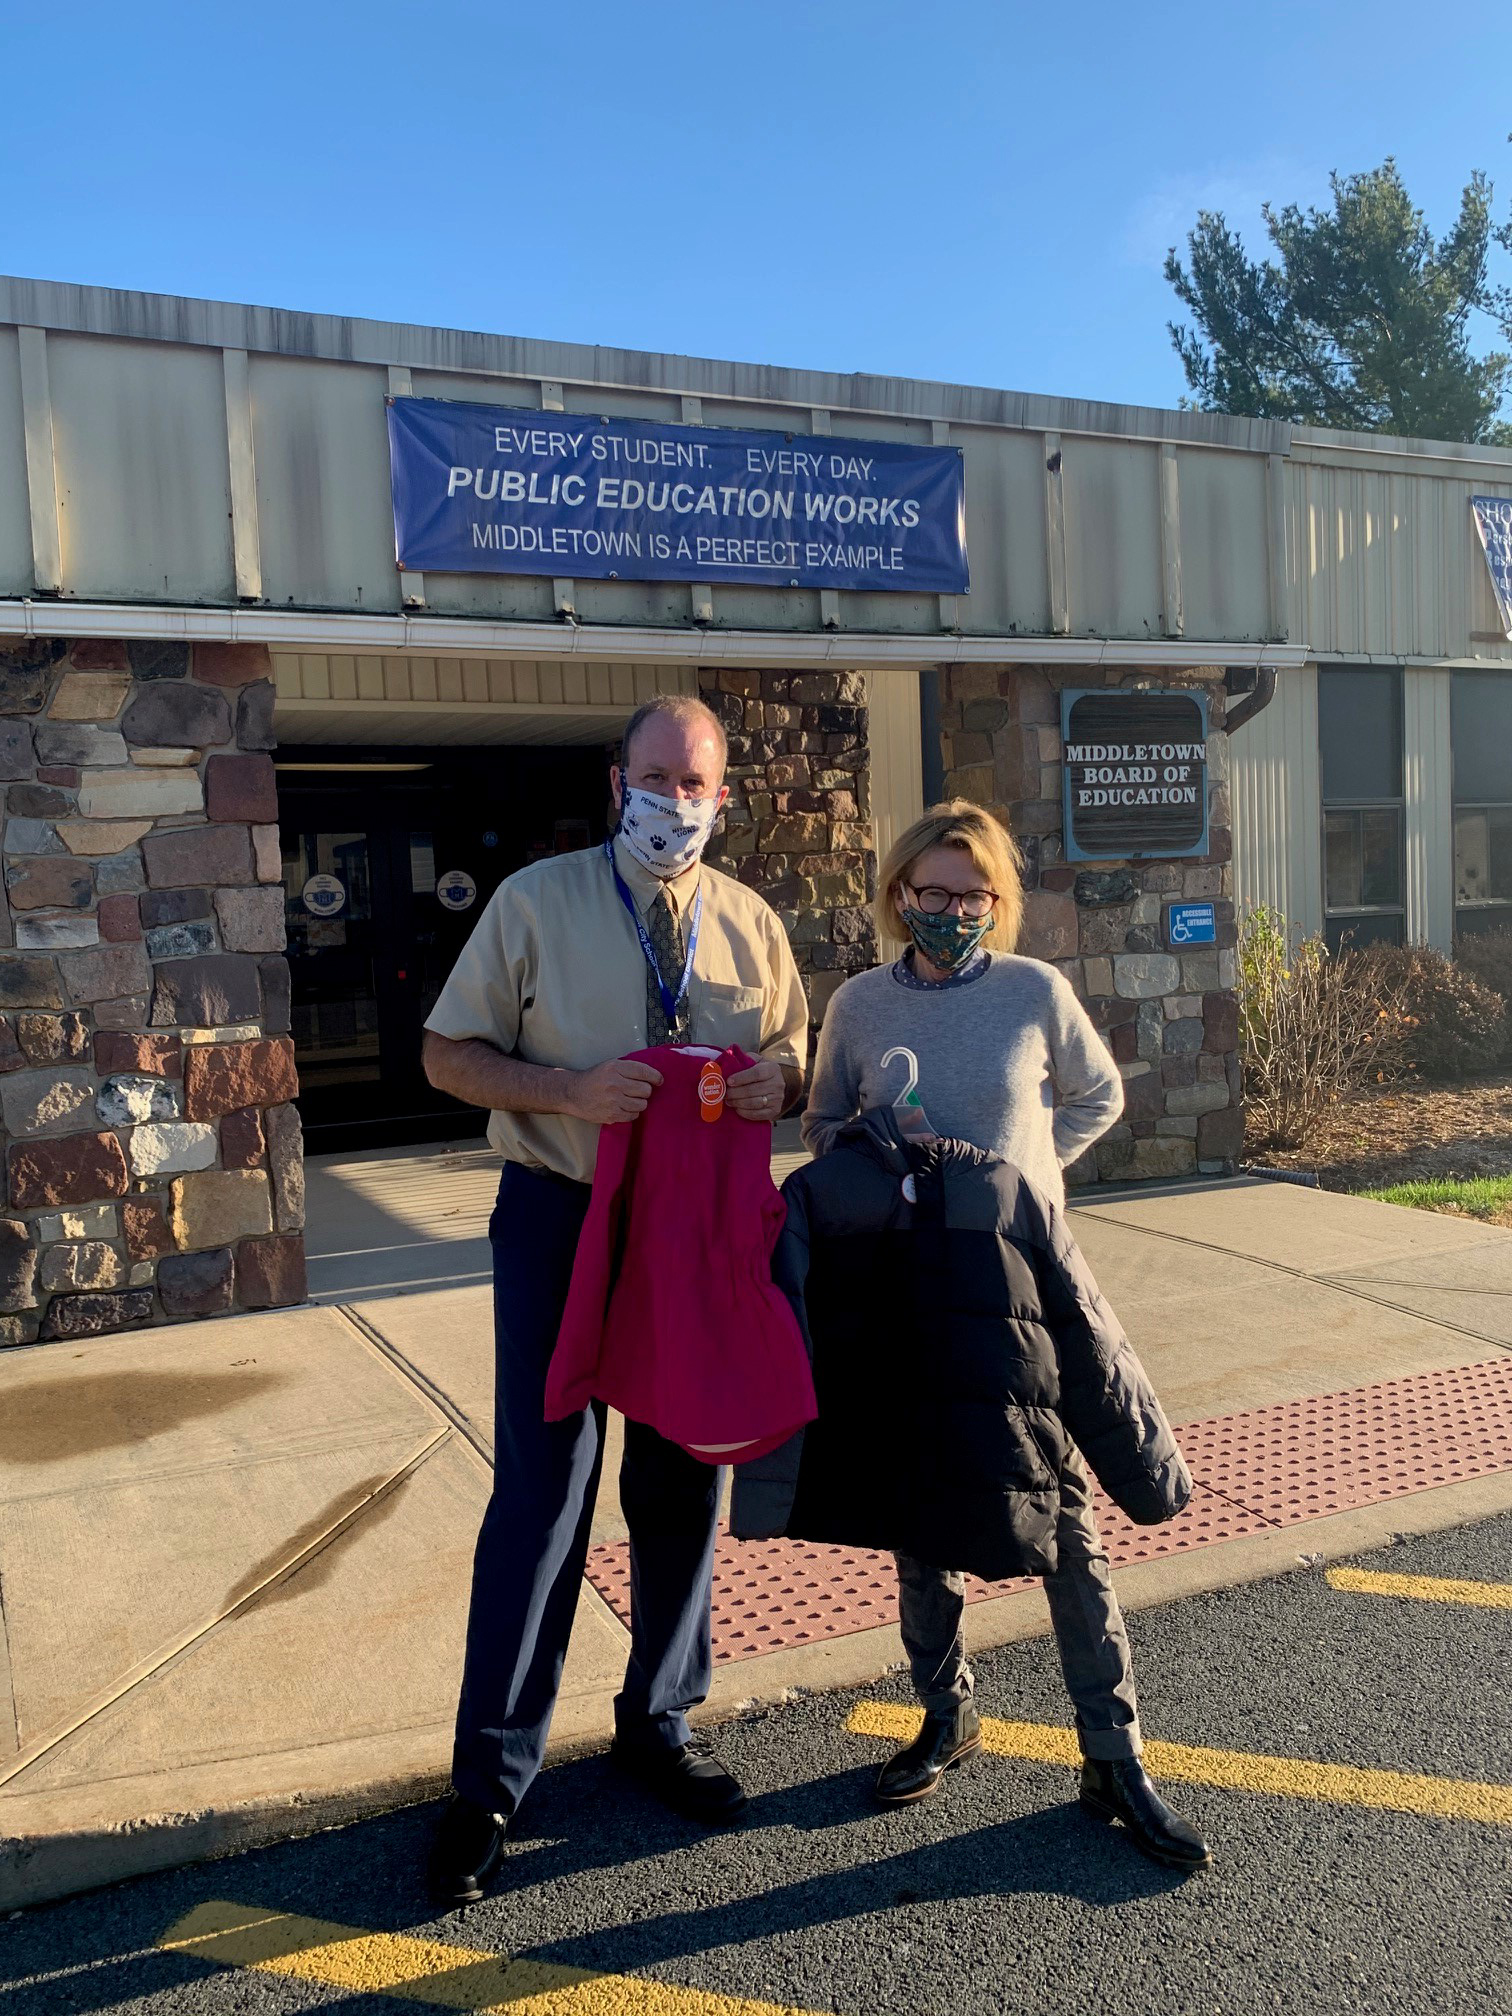 Today I had the privilege of delivering over 300 coats, boots, hats, and gloves to local school districts throughout the 100th District. This is an initiative that I have been doing for years. The pa